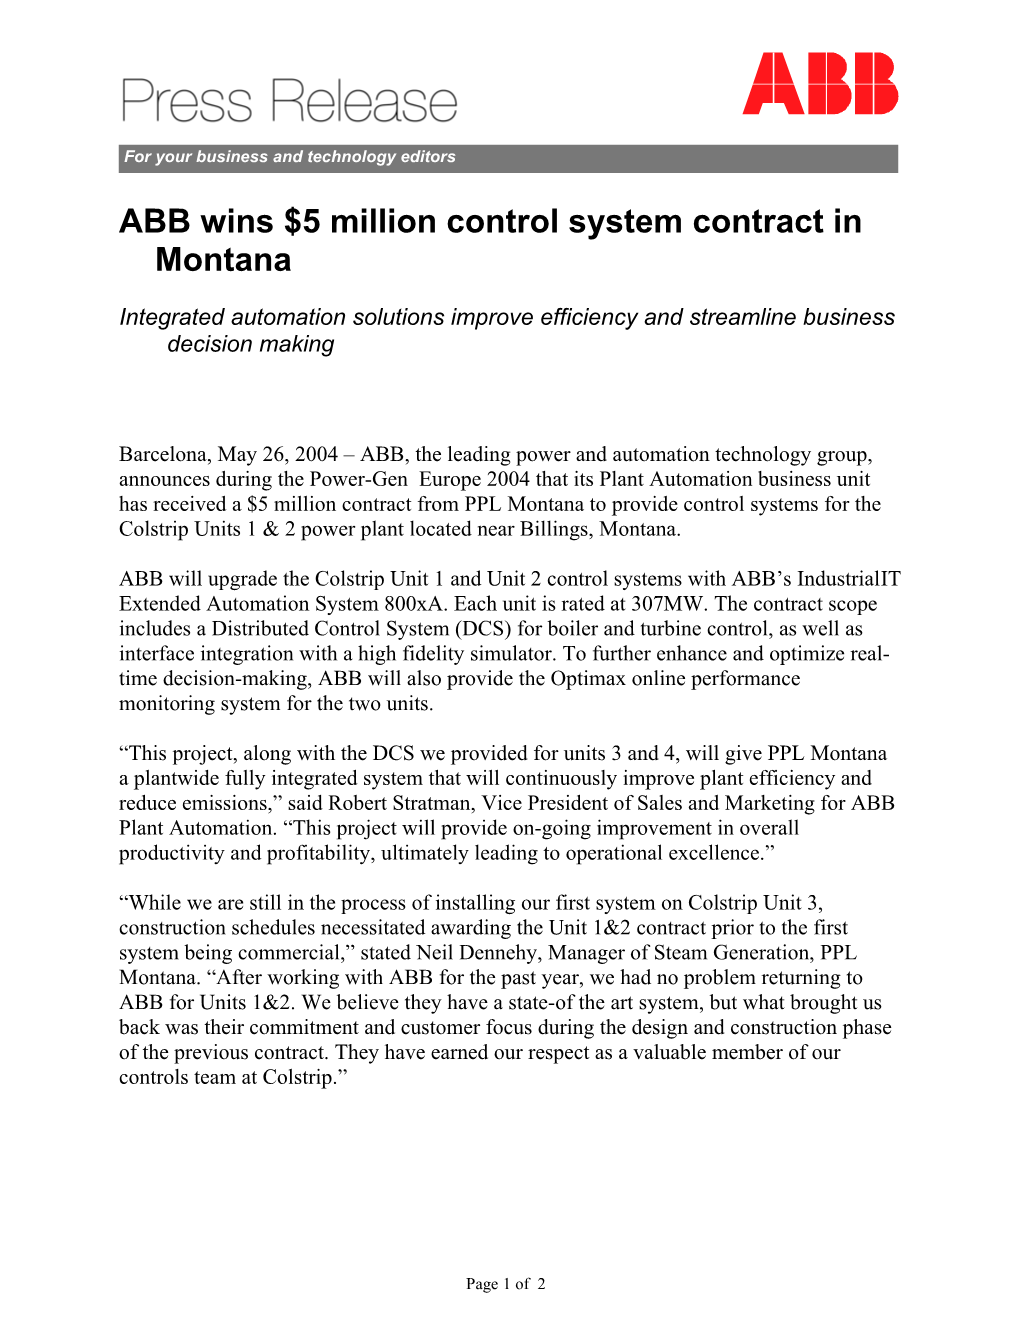 ABB Wins $5 Million Control System Contract in Montana